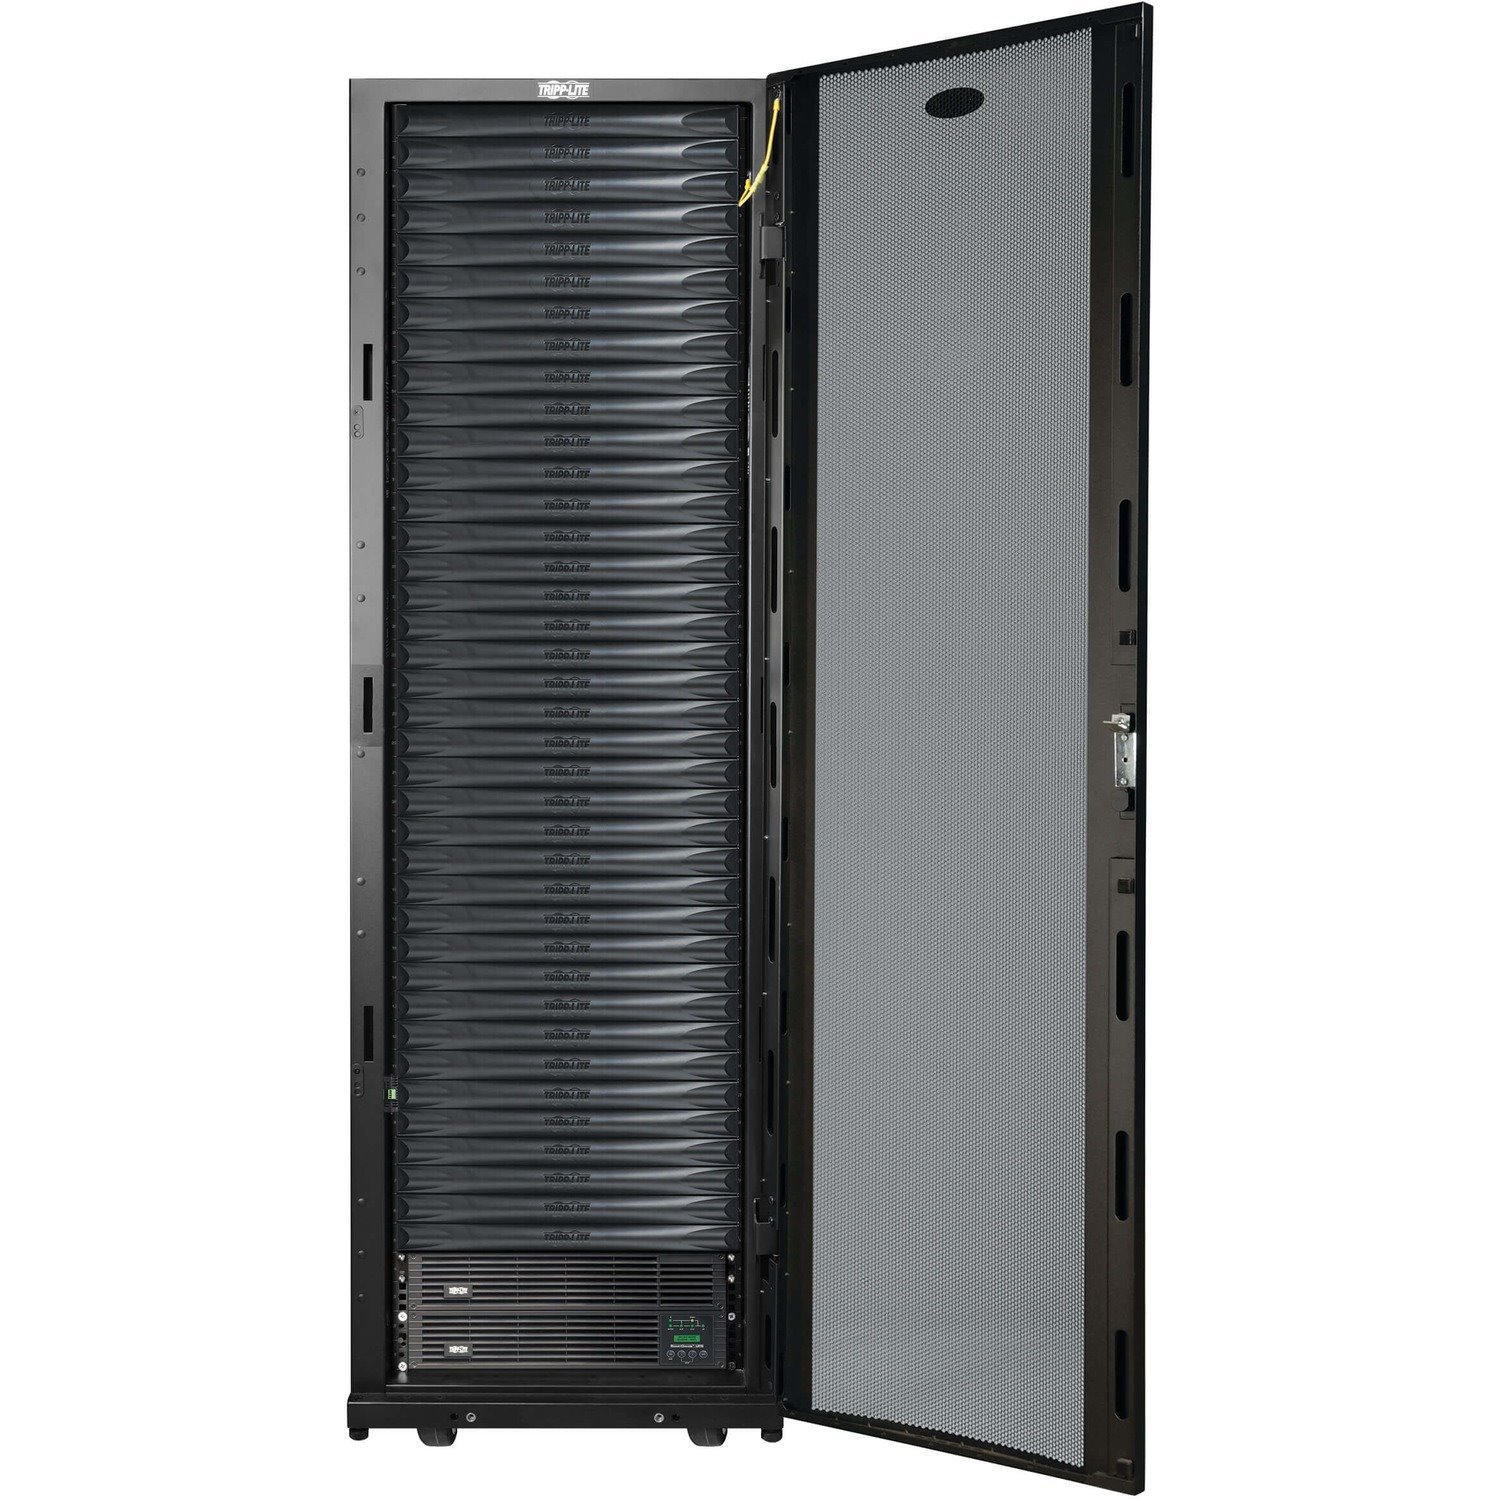 Tripp Lite by Eaton EdgeReady&trade; Micro Data Center - 38U, 6 kVA UPS, Network Management and PDU, 208/240V Assembled/Tested Unit